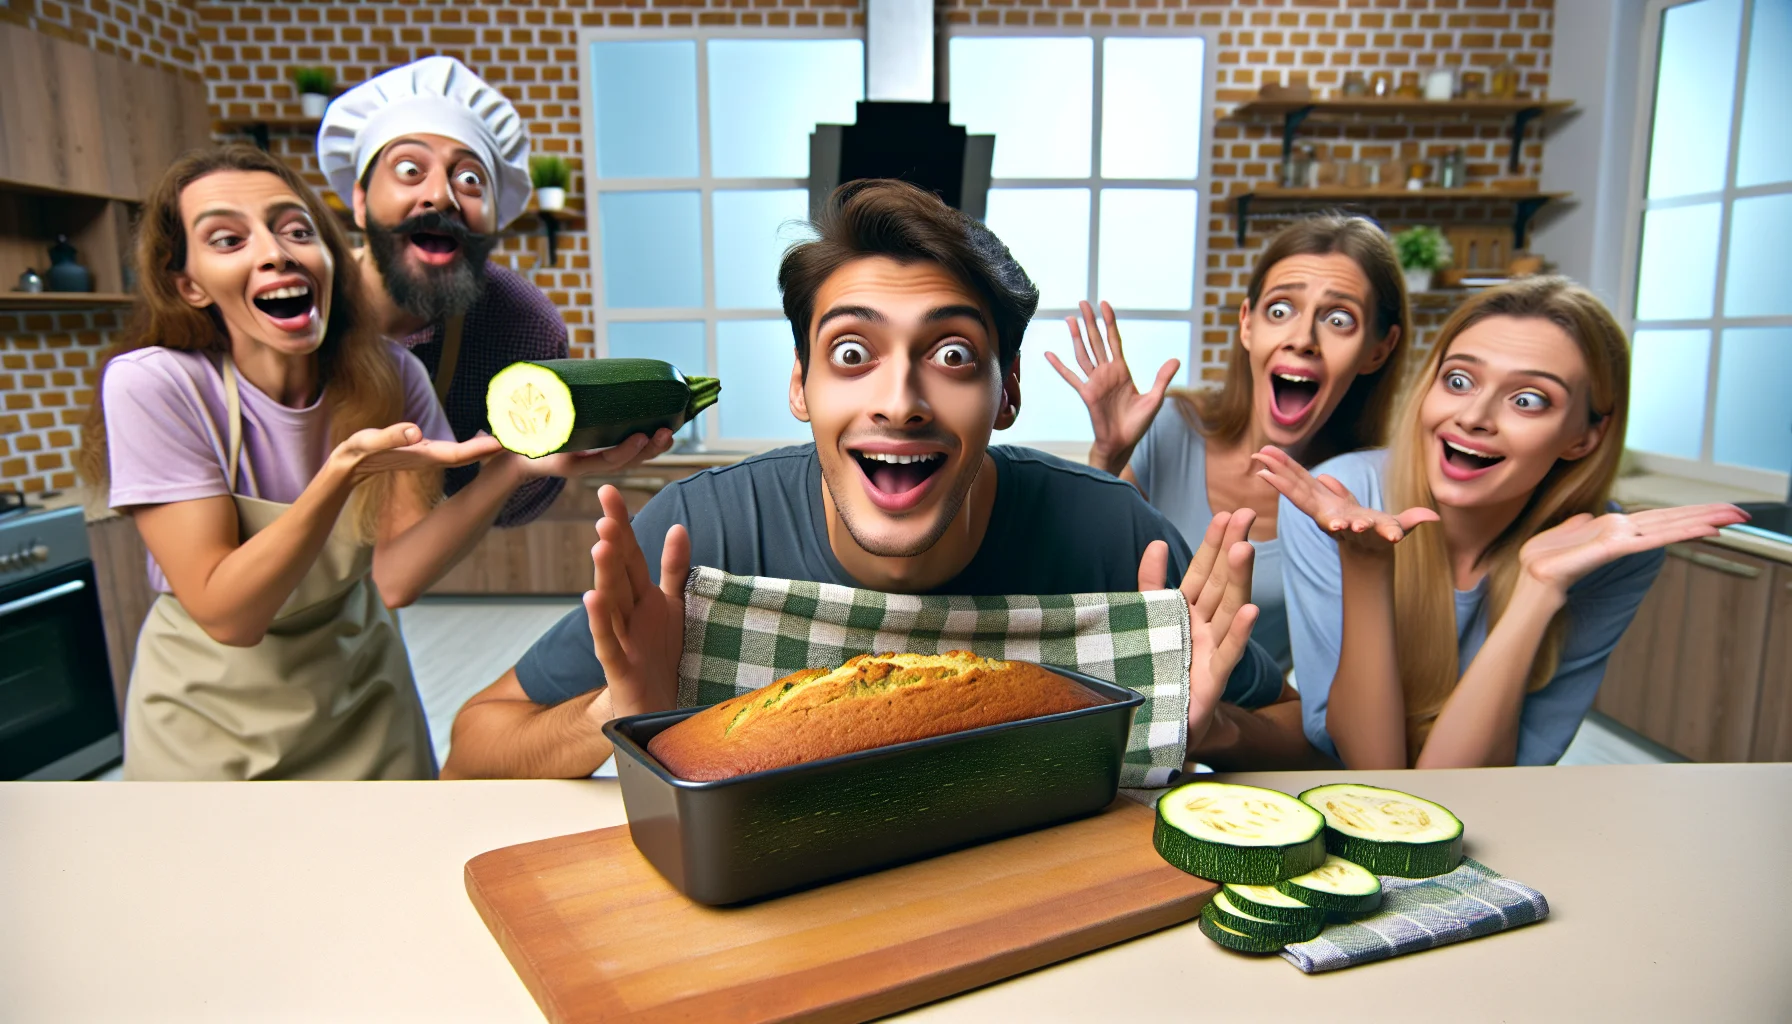 Create a realistic image of a scenario featuring a humorous situation centered around zucchini bread. This is no ordinary zucchini bread; it's part of a cost-effective and healthy recipe. Make it so enticing, lively, and appealing that it arouses the curiosity of people to try it. In the frame, introduce an eco-friendly kitchen with individuals of different genders and descents cooking and enjoying the aroma of freshly baked zucchini bread. Show some funny and quirky expressions of joy, surprise, and overwhelm expressing how such a simple and cost-effective recipe can be so delicious and promoting healthy eating.